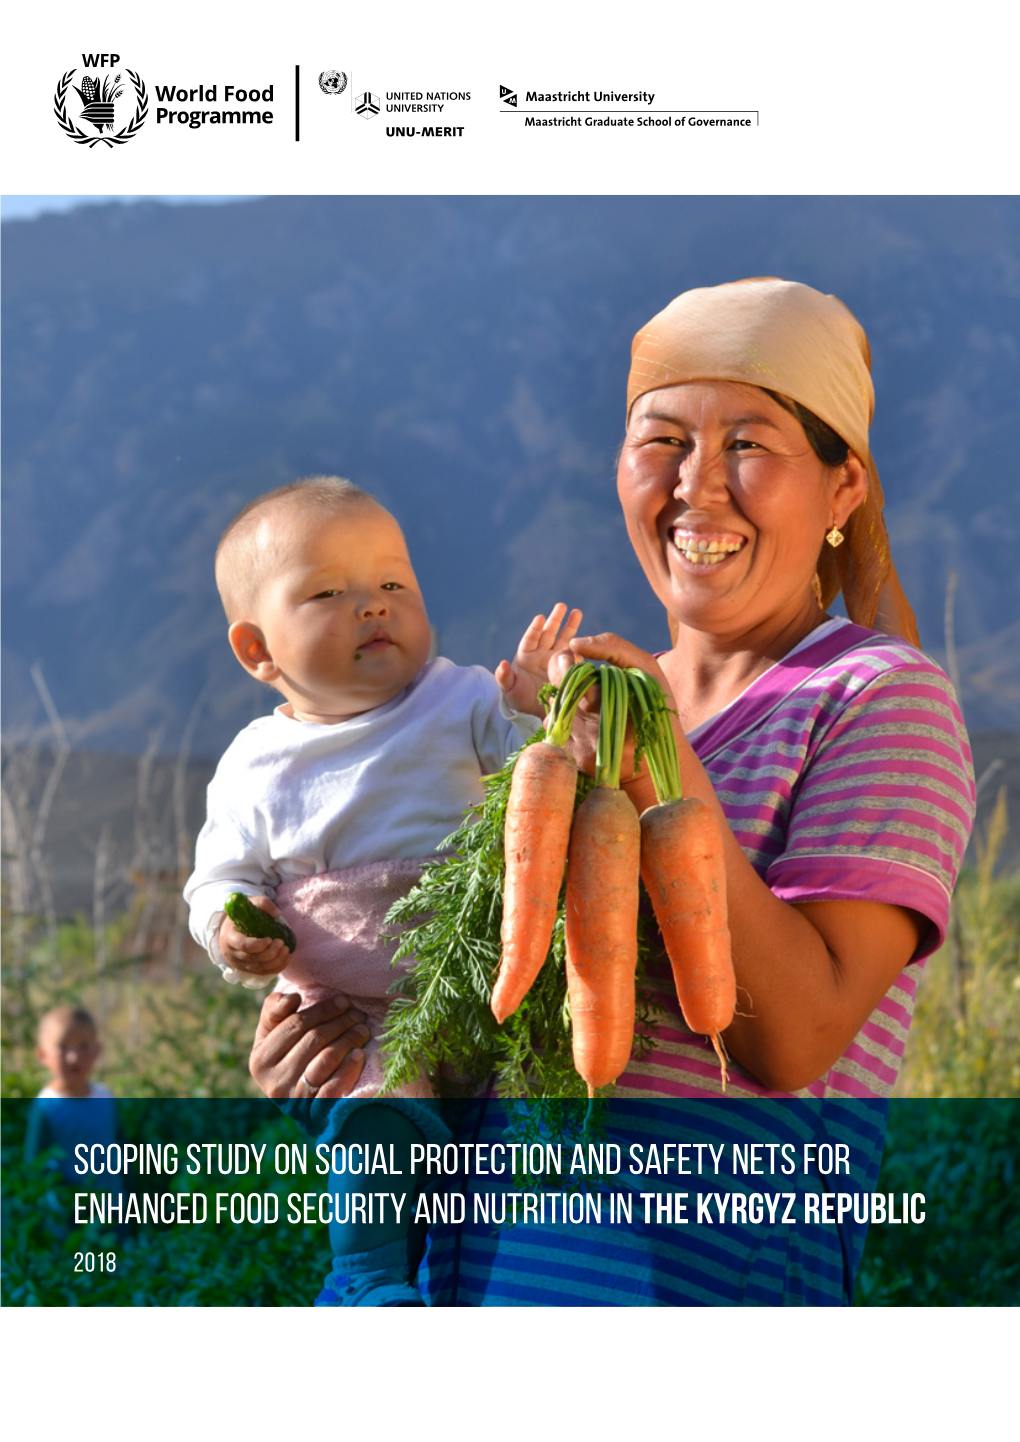 Scoping Study on Social Protection and Safety Nets for Enhanced Food Security and Nutrition in the KYRGYZ REPUBLIC 2018 R U S S I a N F E D E R a T I O N